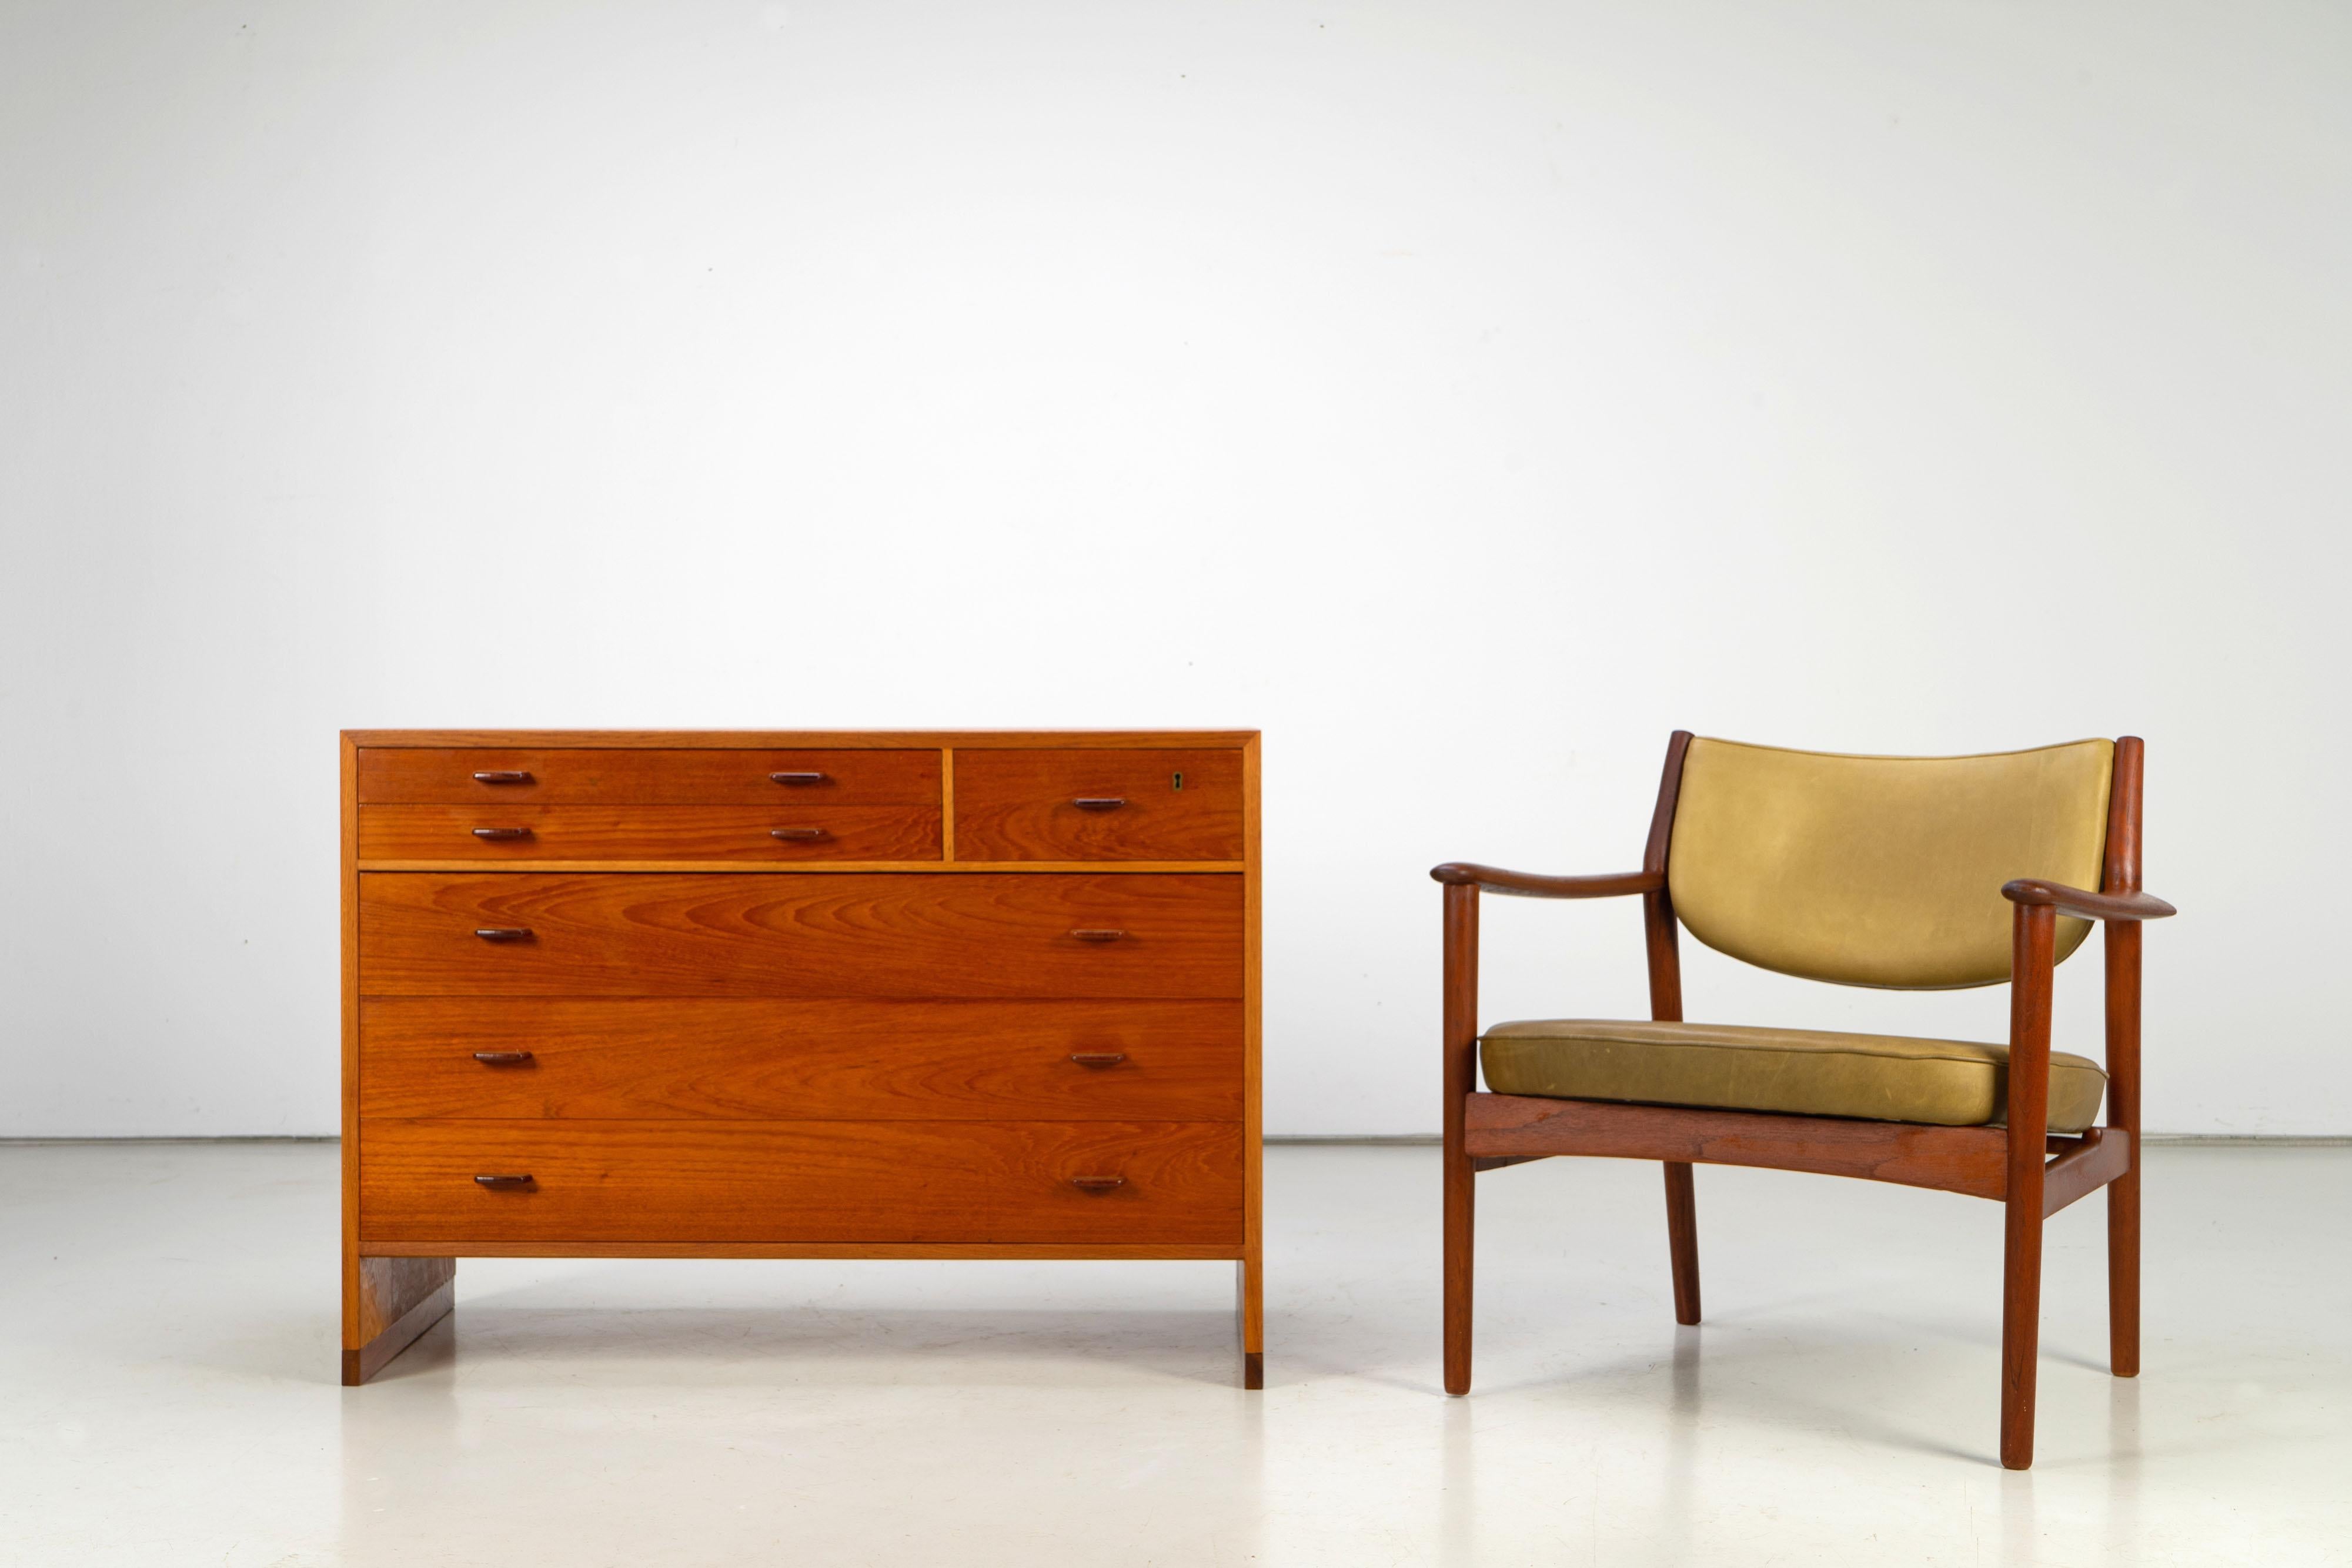 Pair of Scandinavian Easy Chairs with Teak and Leather by Westnofa, 1960s For Sale 7